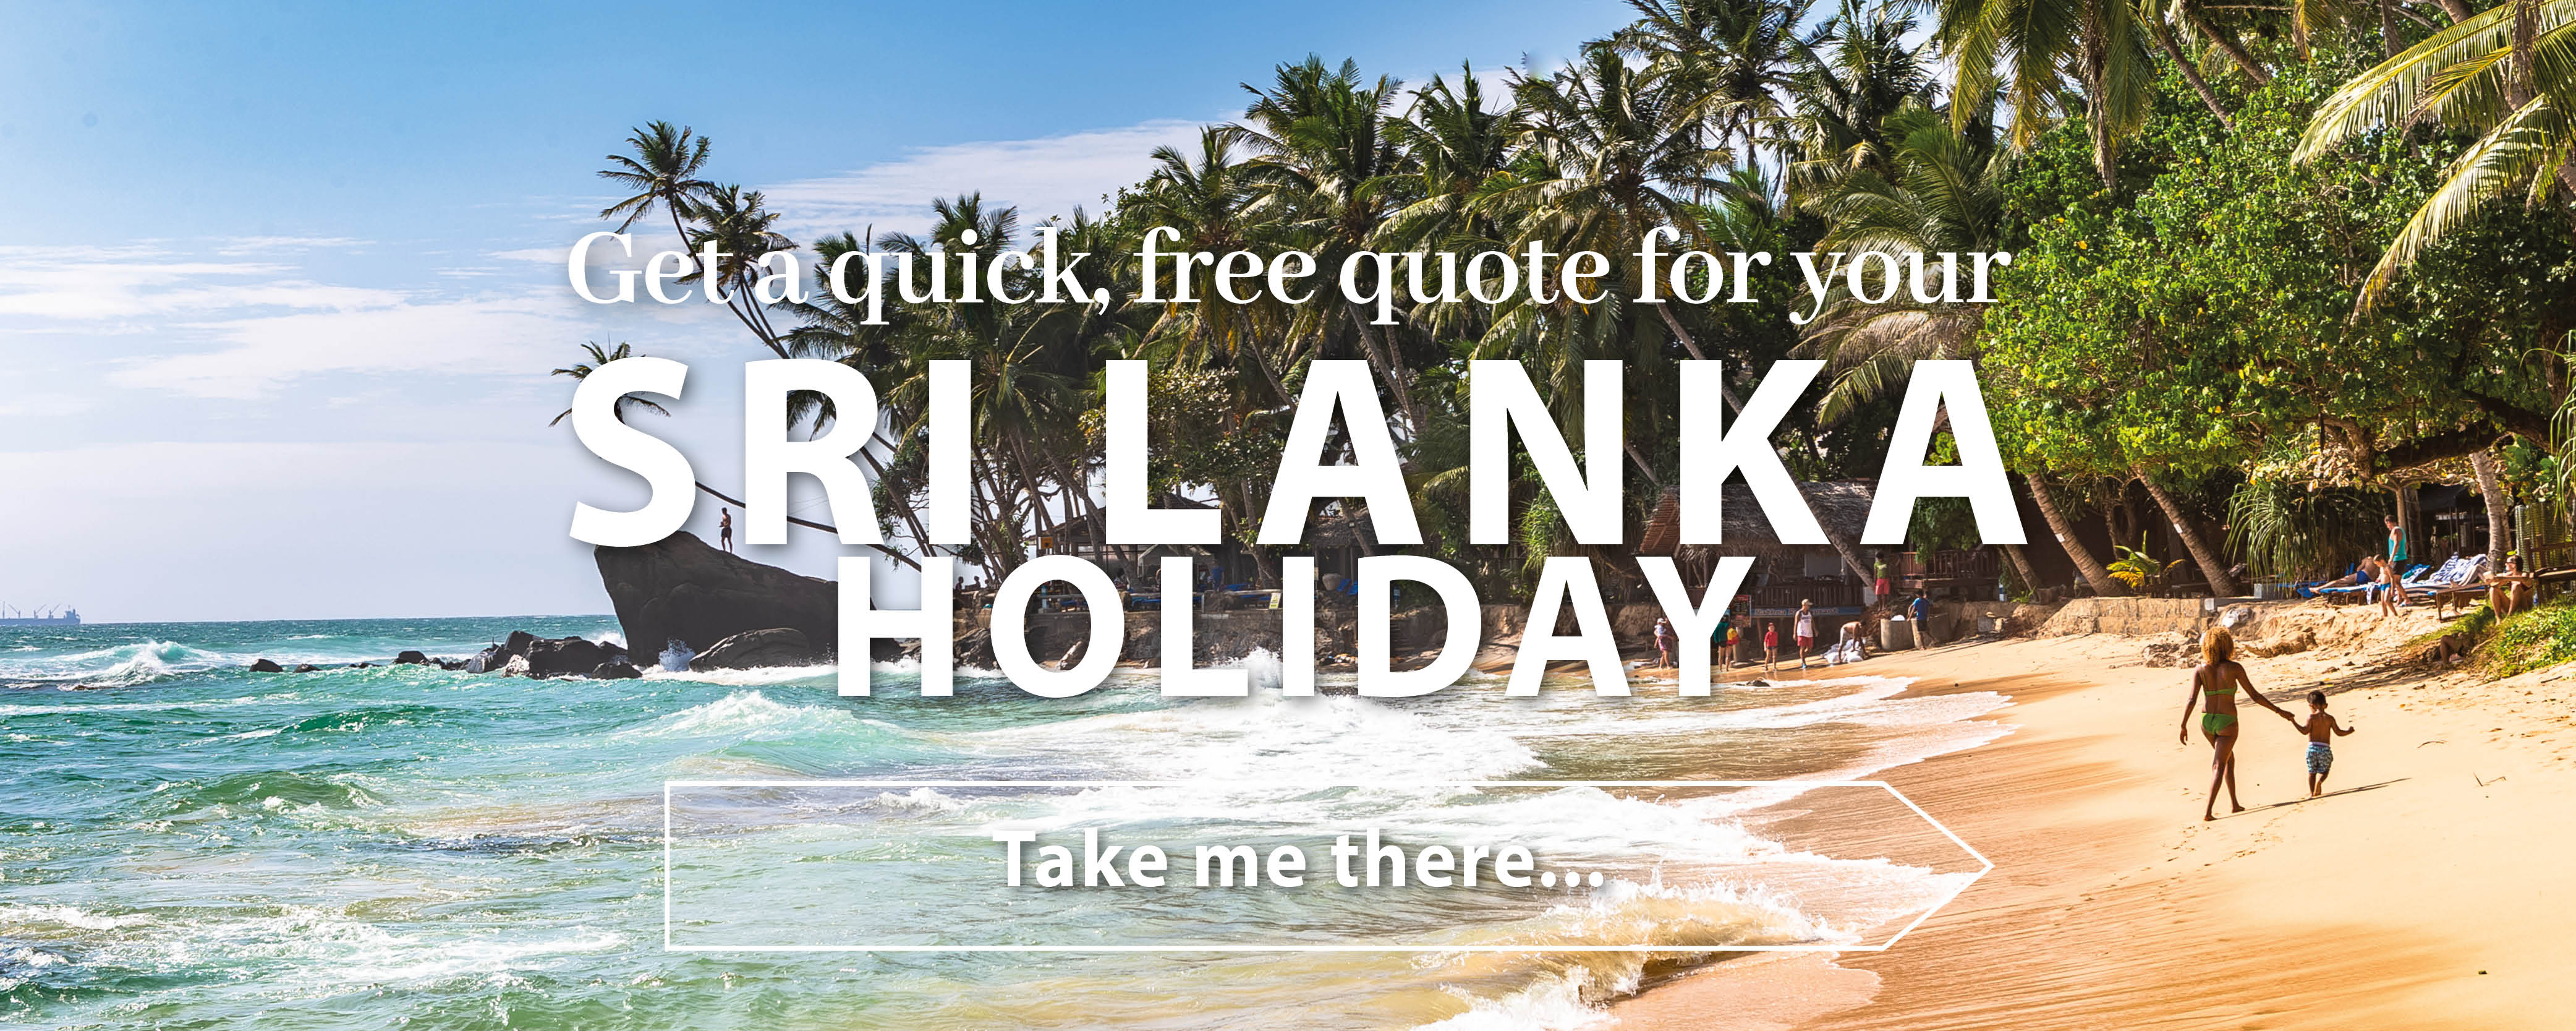 Get a quote for your Sri Lanka Holiday